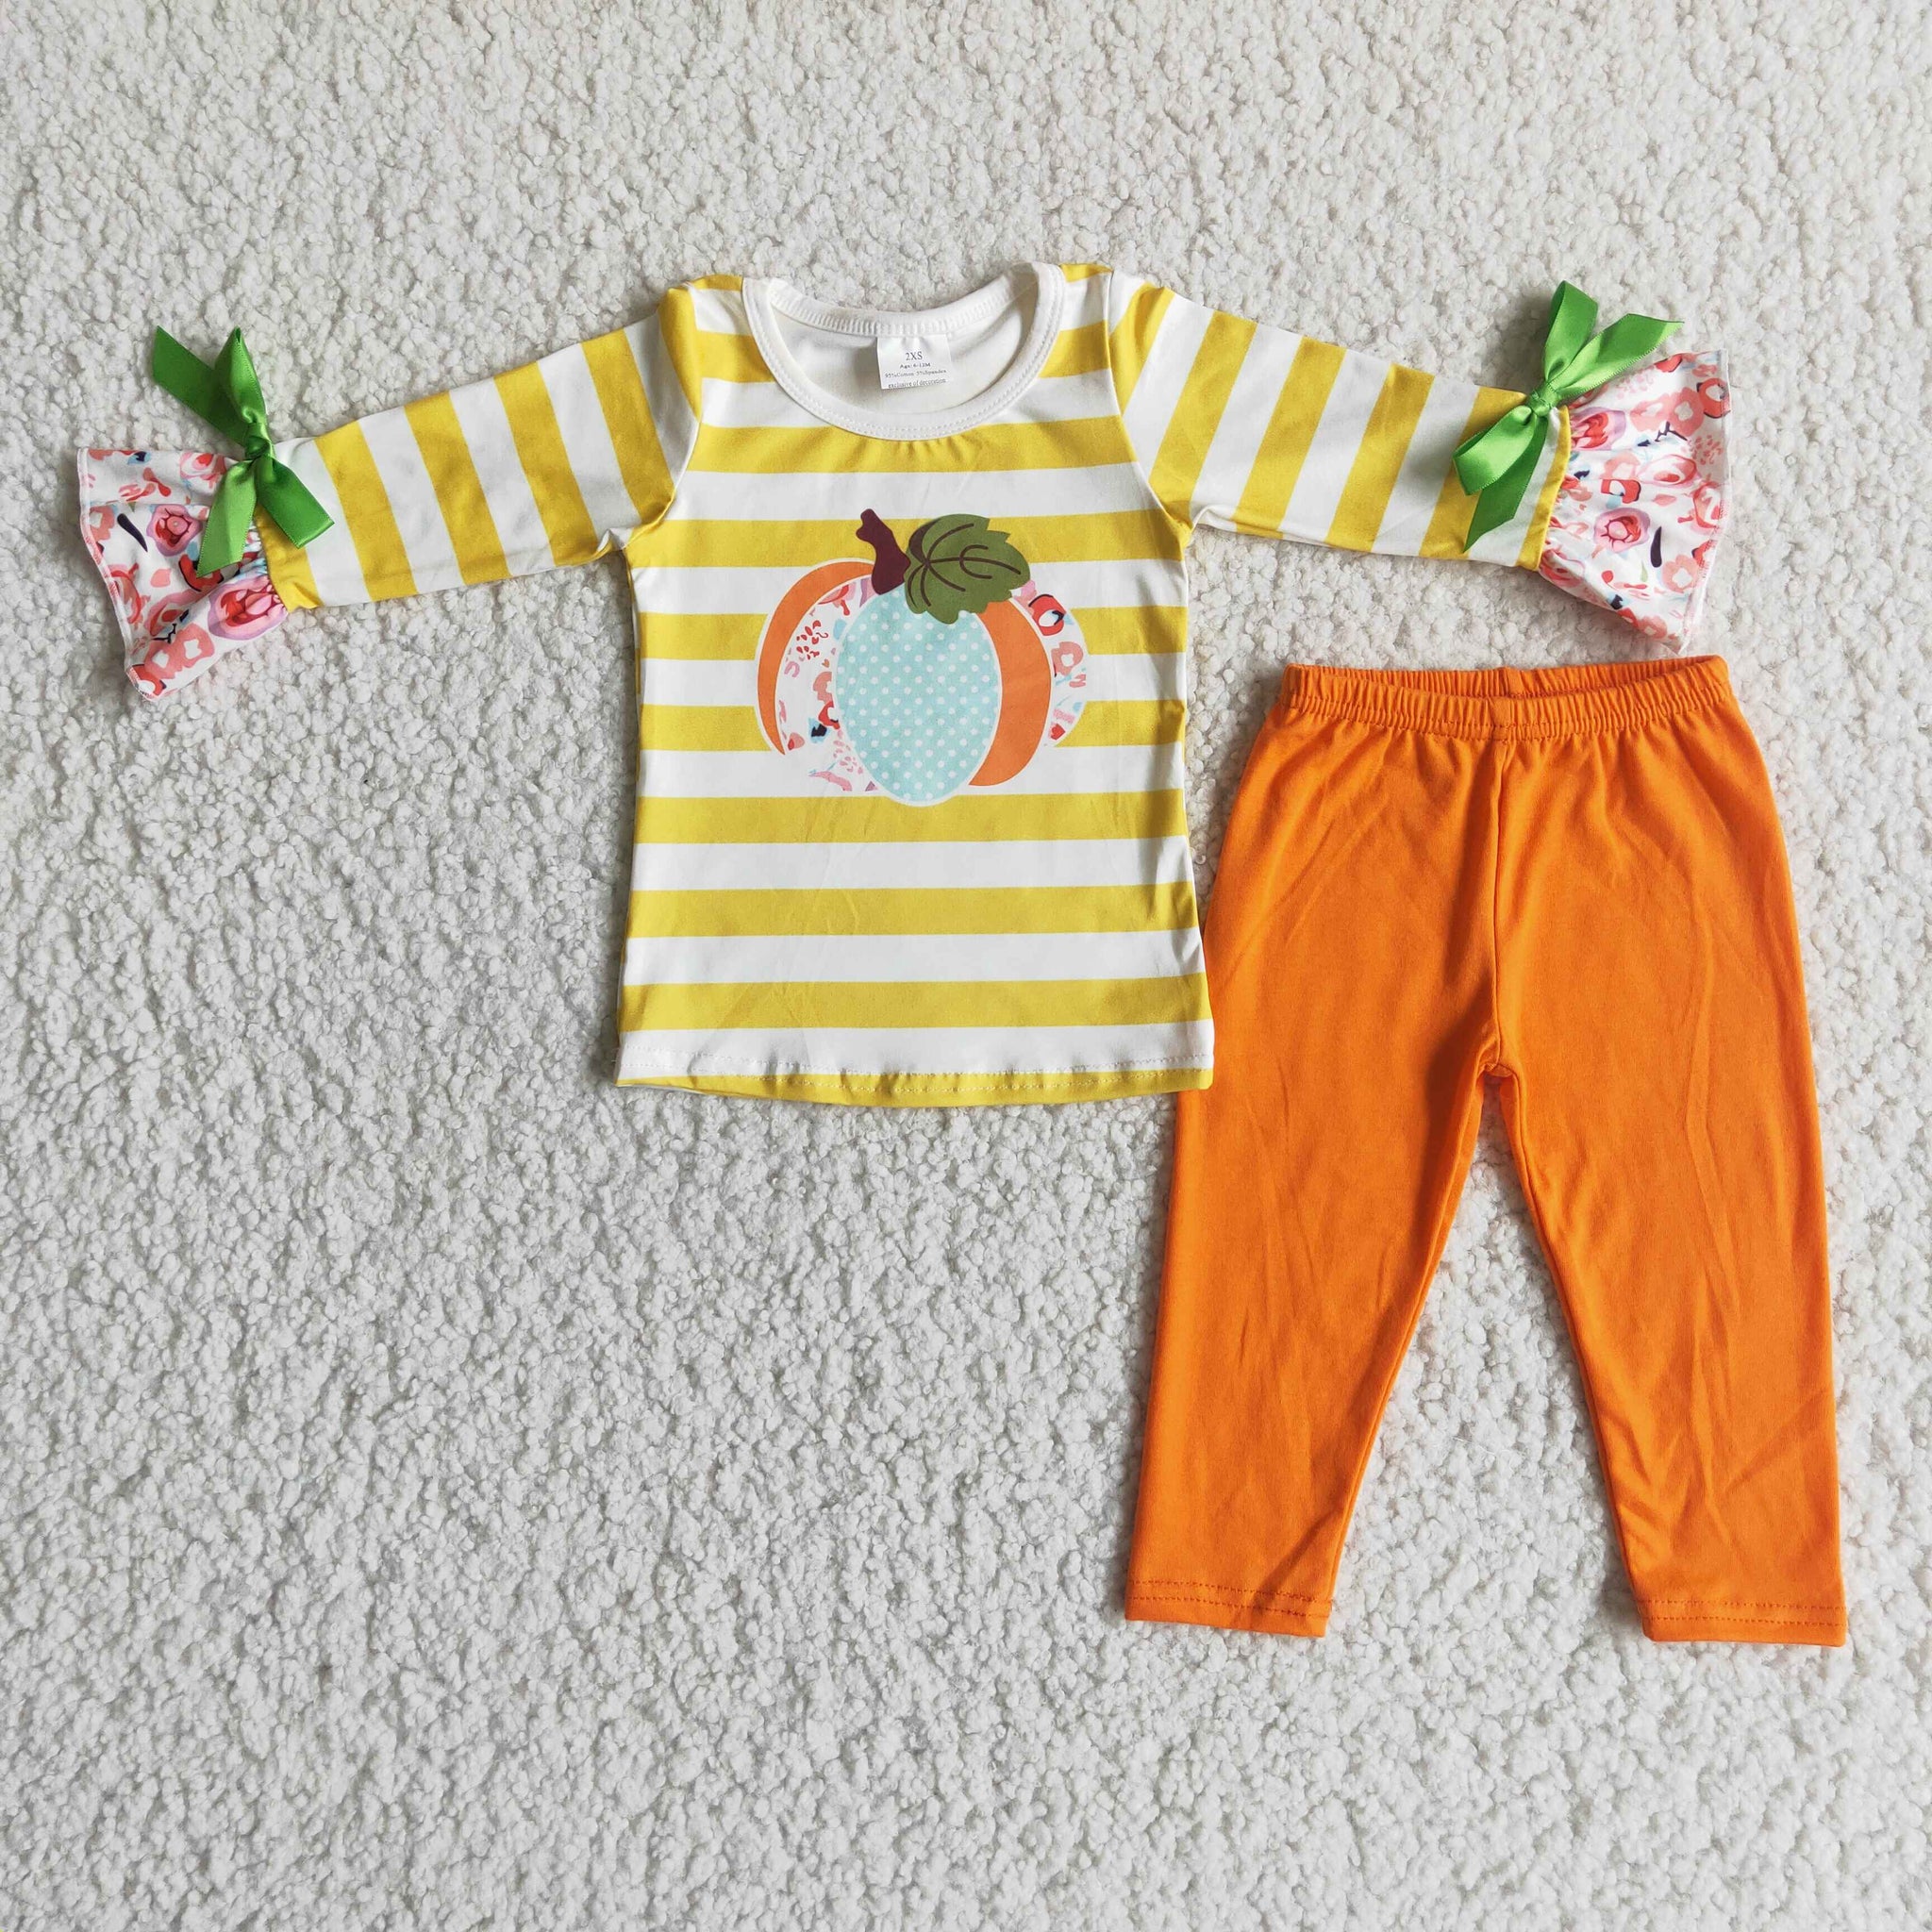 6 A10-14 baby girl clothes pumpkin winter outfits-promotion 2023.9.11